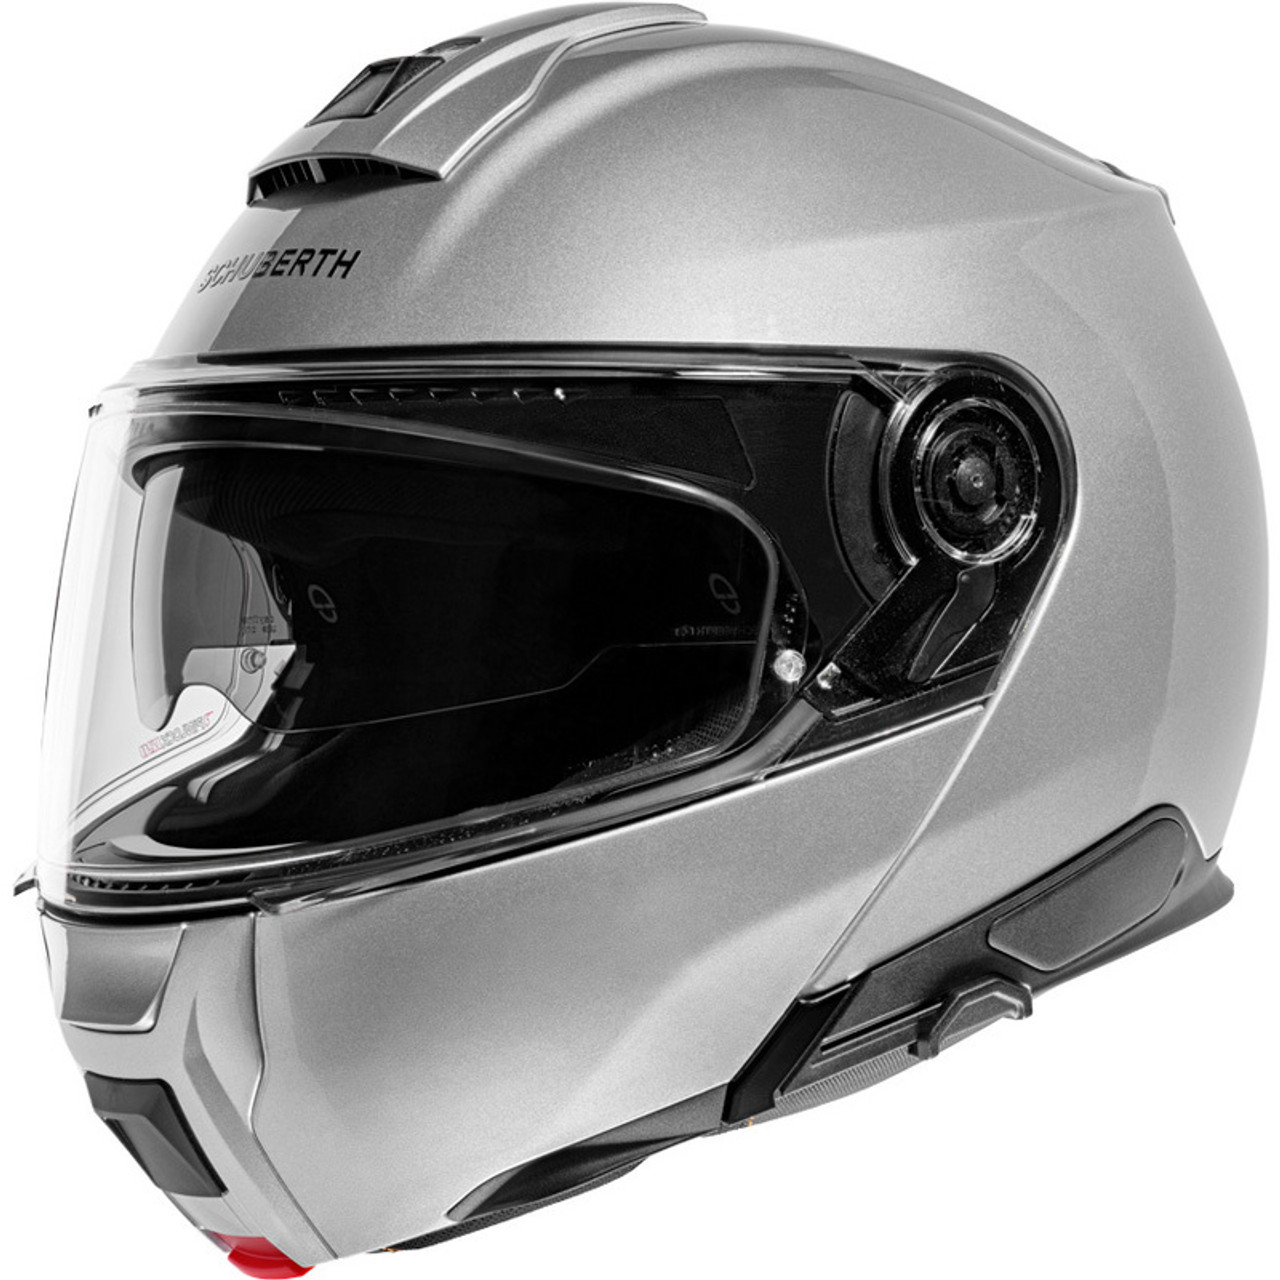 NEW Schuberth C5 Motorcycle Flip-Up Helmet, All Sizes & Colors, Free Ship